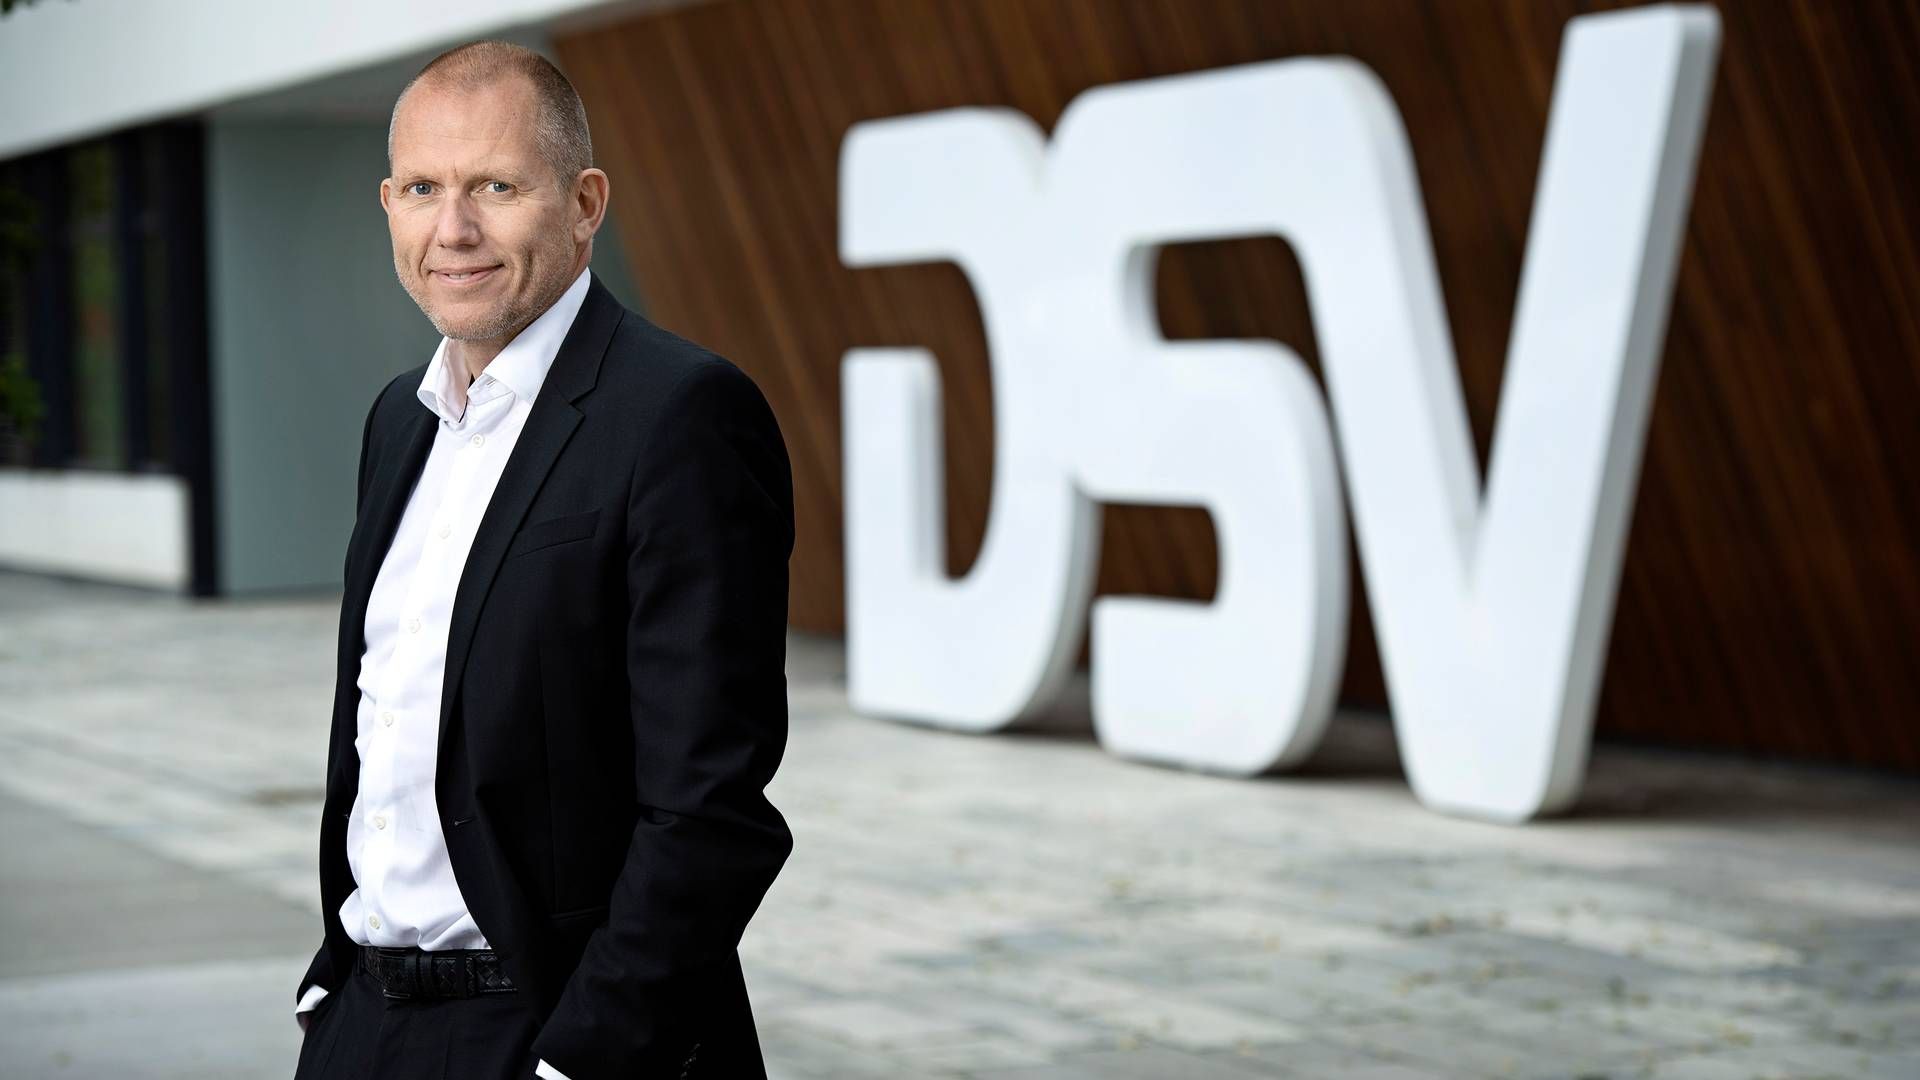 "Through complex acquisitions, large integrations and challenging markets, we have managed to support our customers, create value for our shareholders," writes DSV's CEO, Jens Bjørn Andersen, about his time at DSV. | Photo: Dsv / Pr